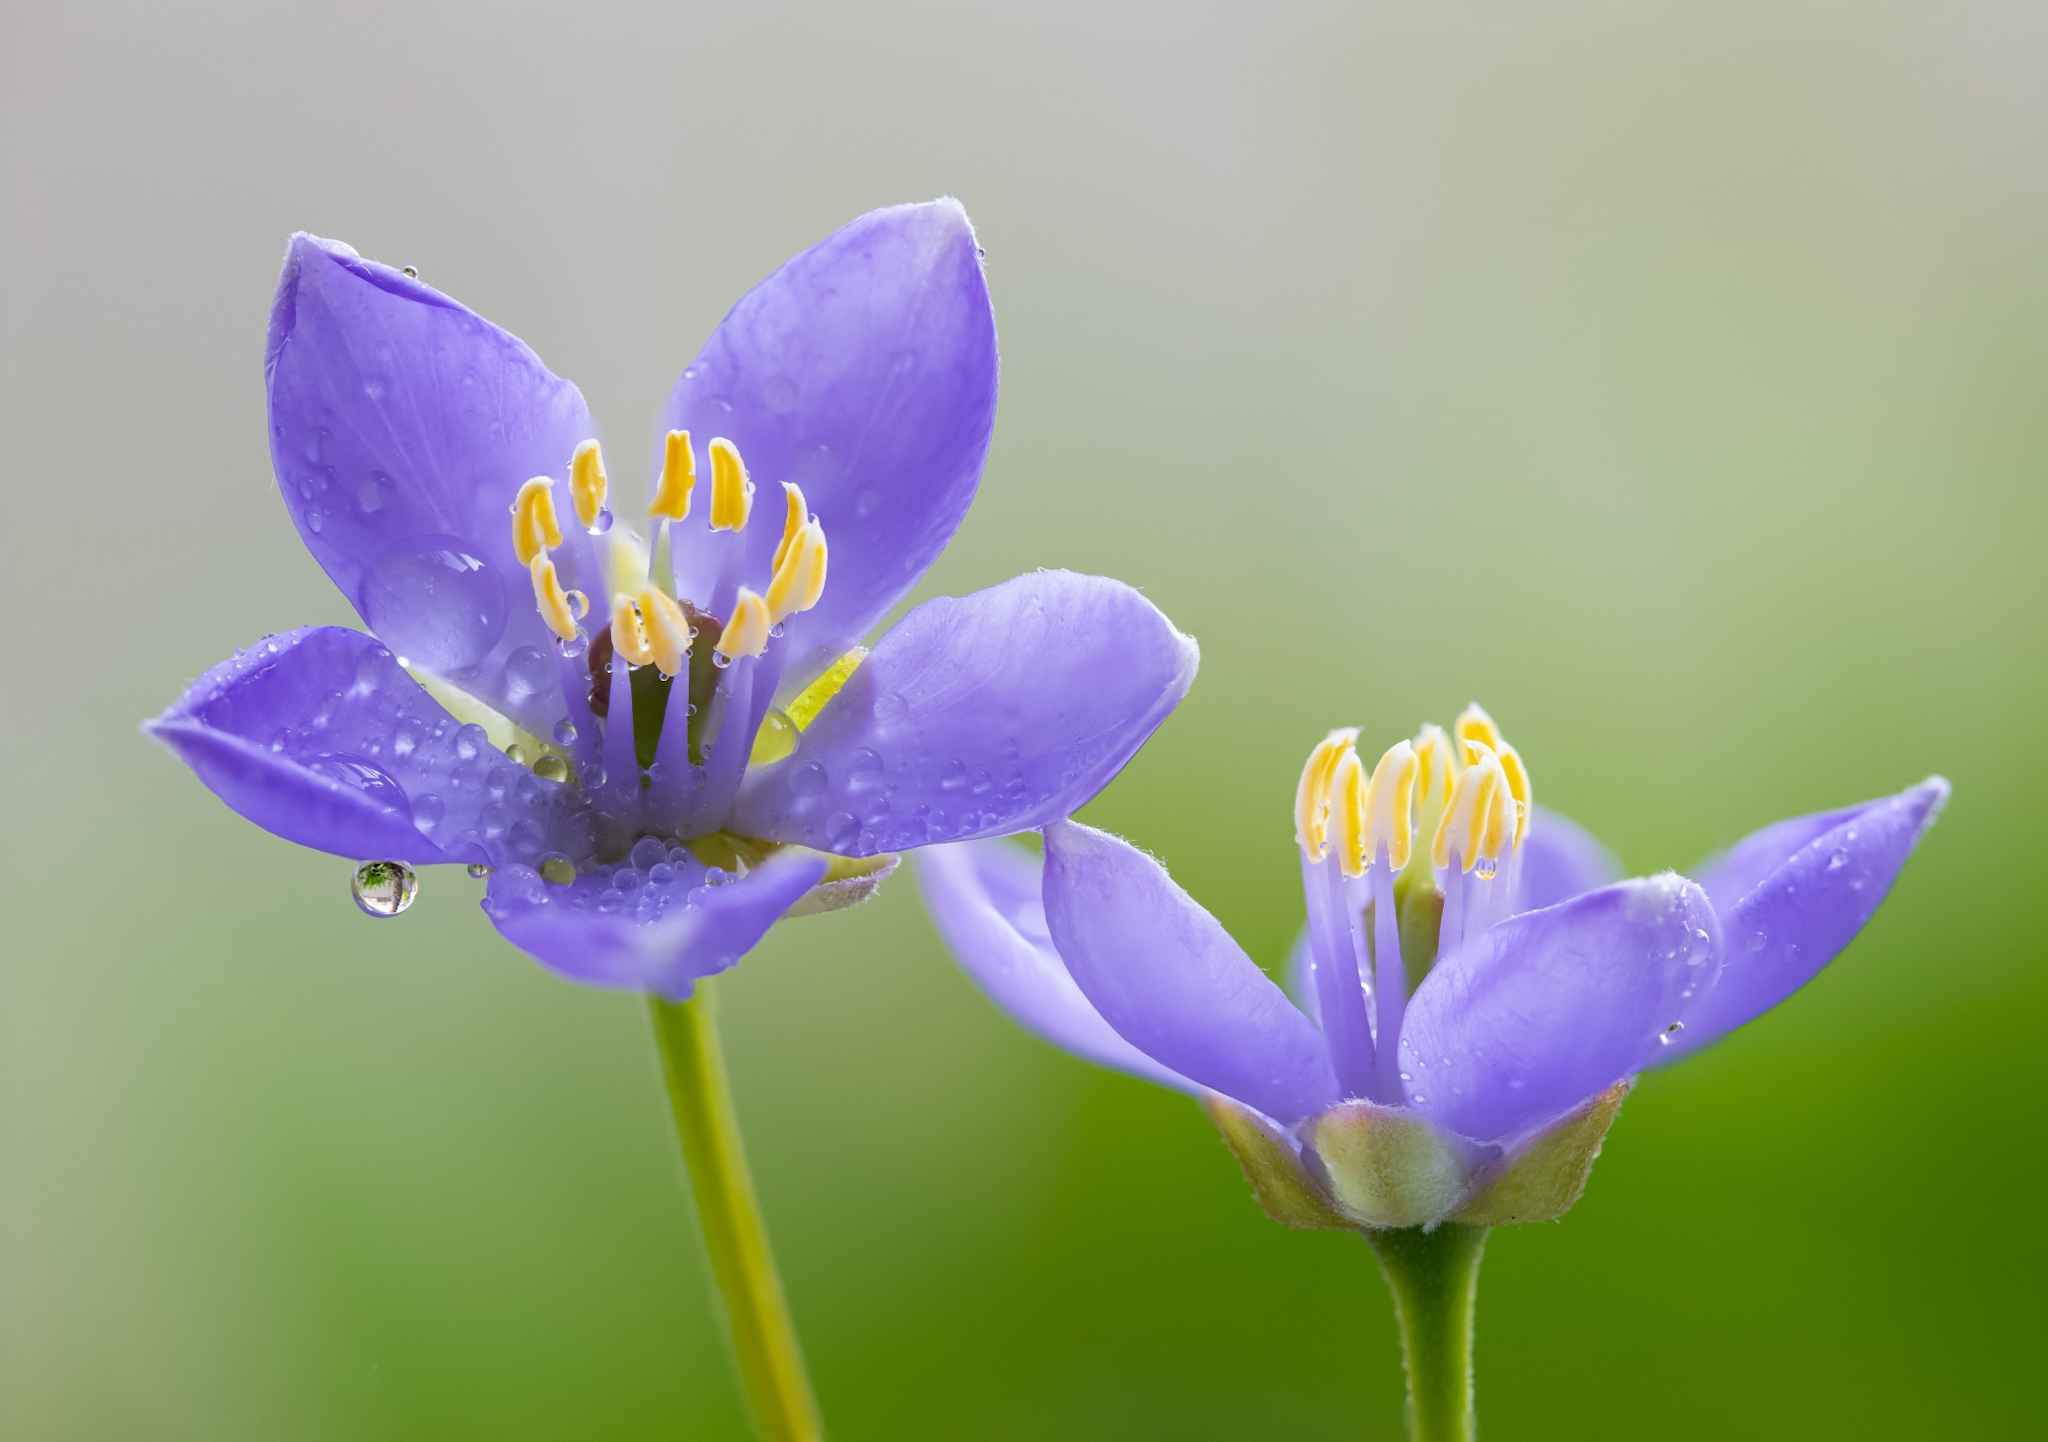 Flower and water drop 